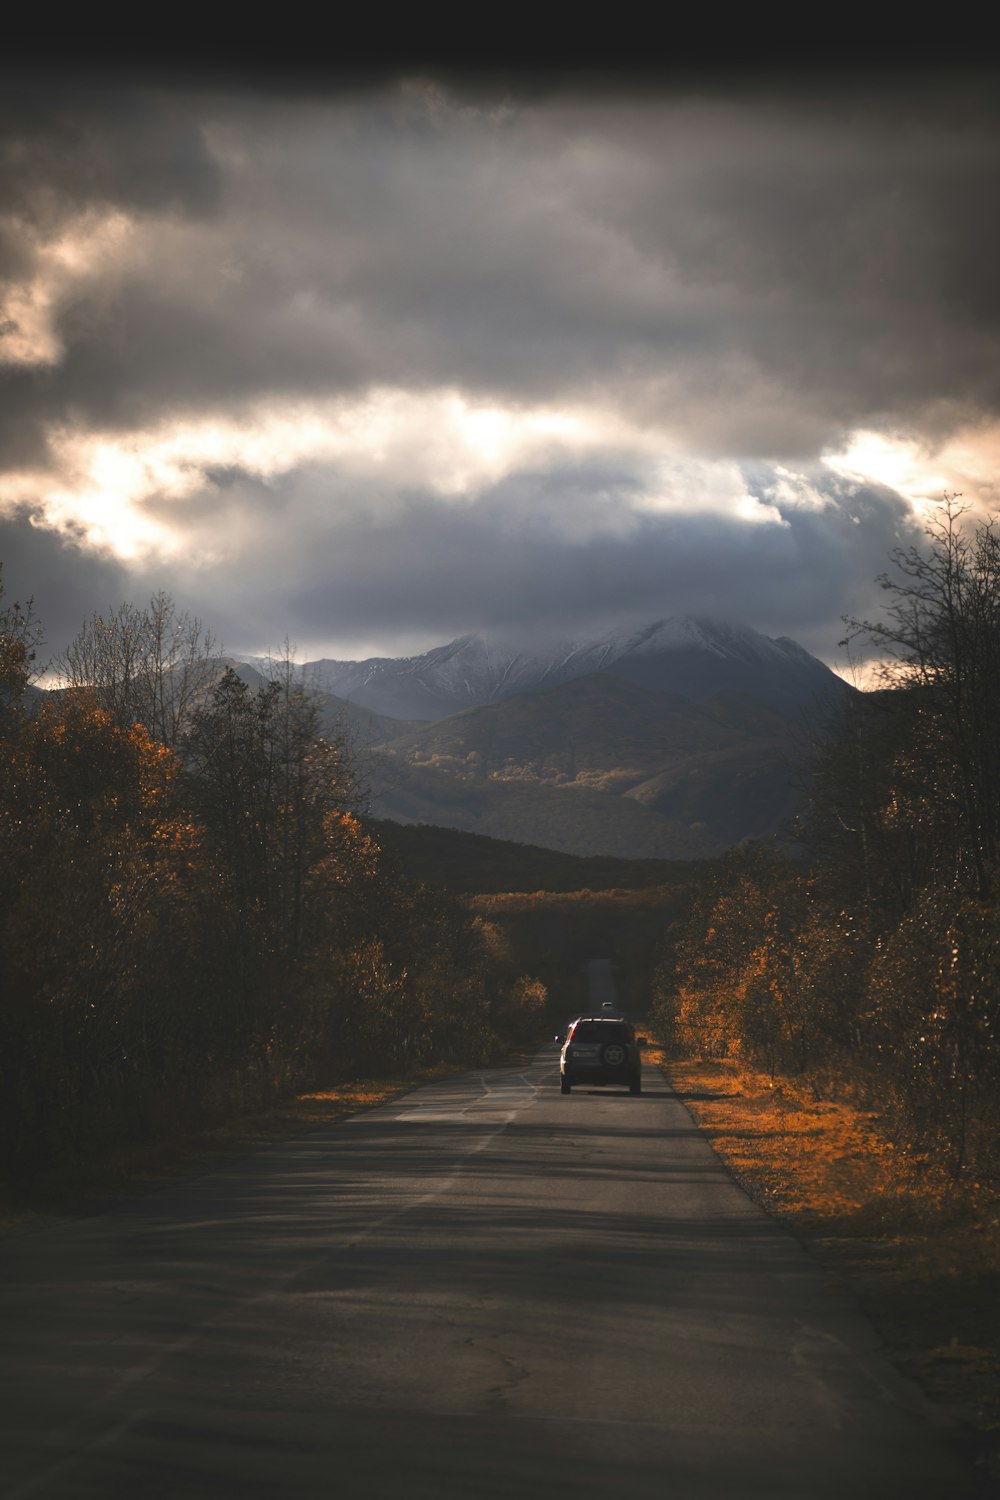 a car driving down a road with trees and mountains in the background